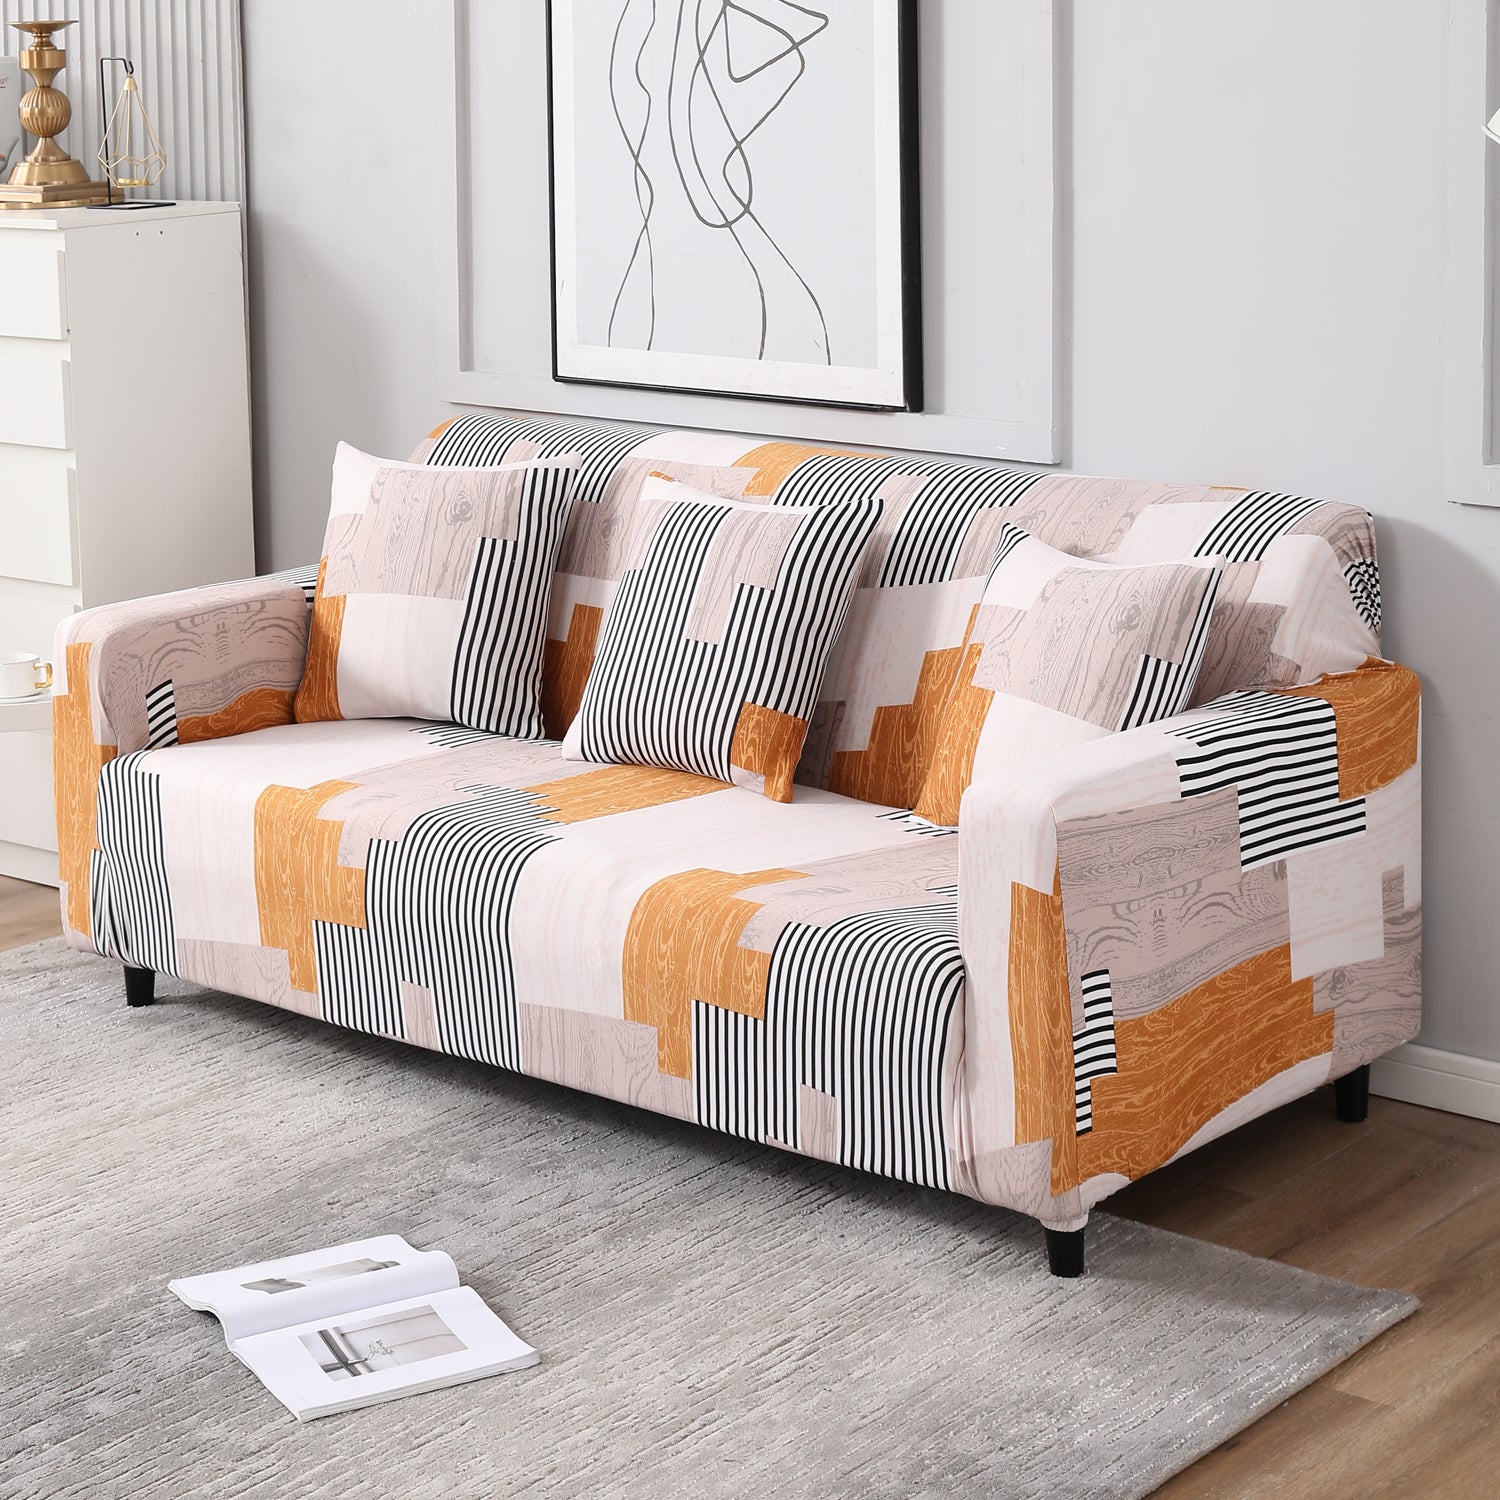 Elastic Stretchable Printed Sofa Cover, Abstract Print